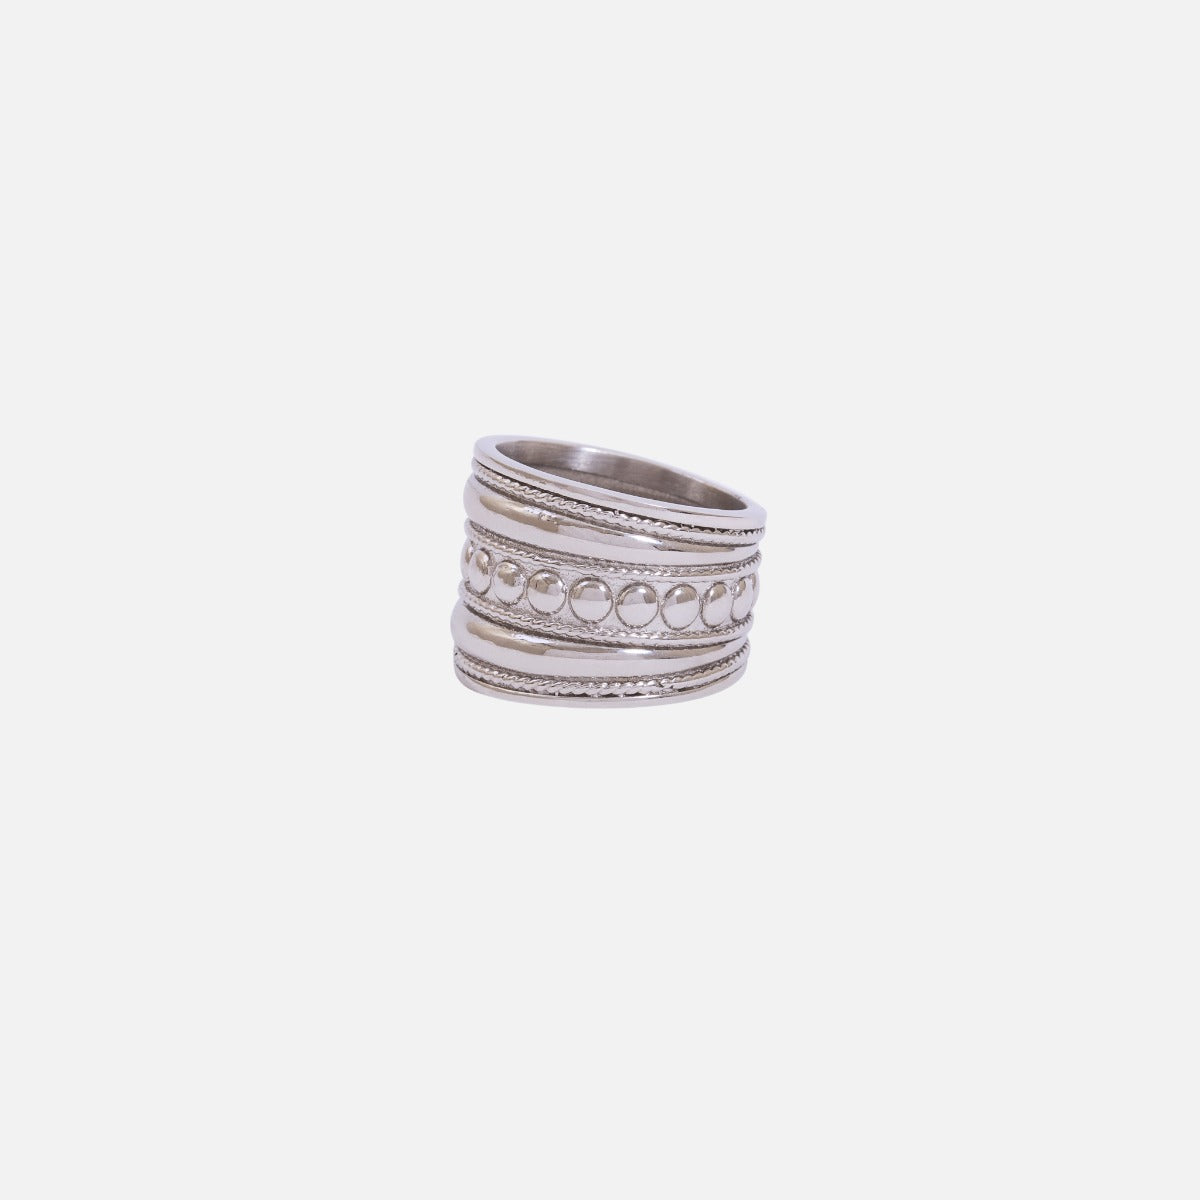 Large stainless steel textured ring